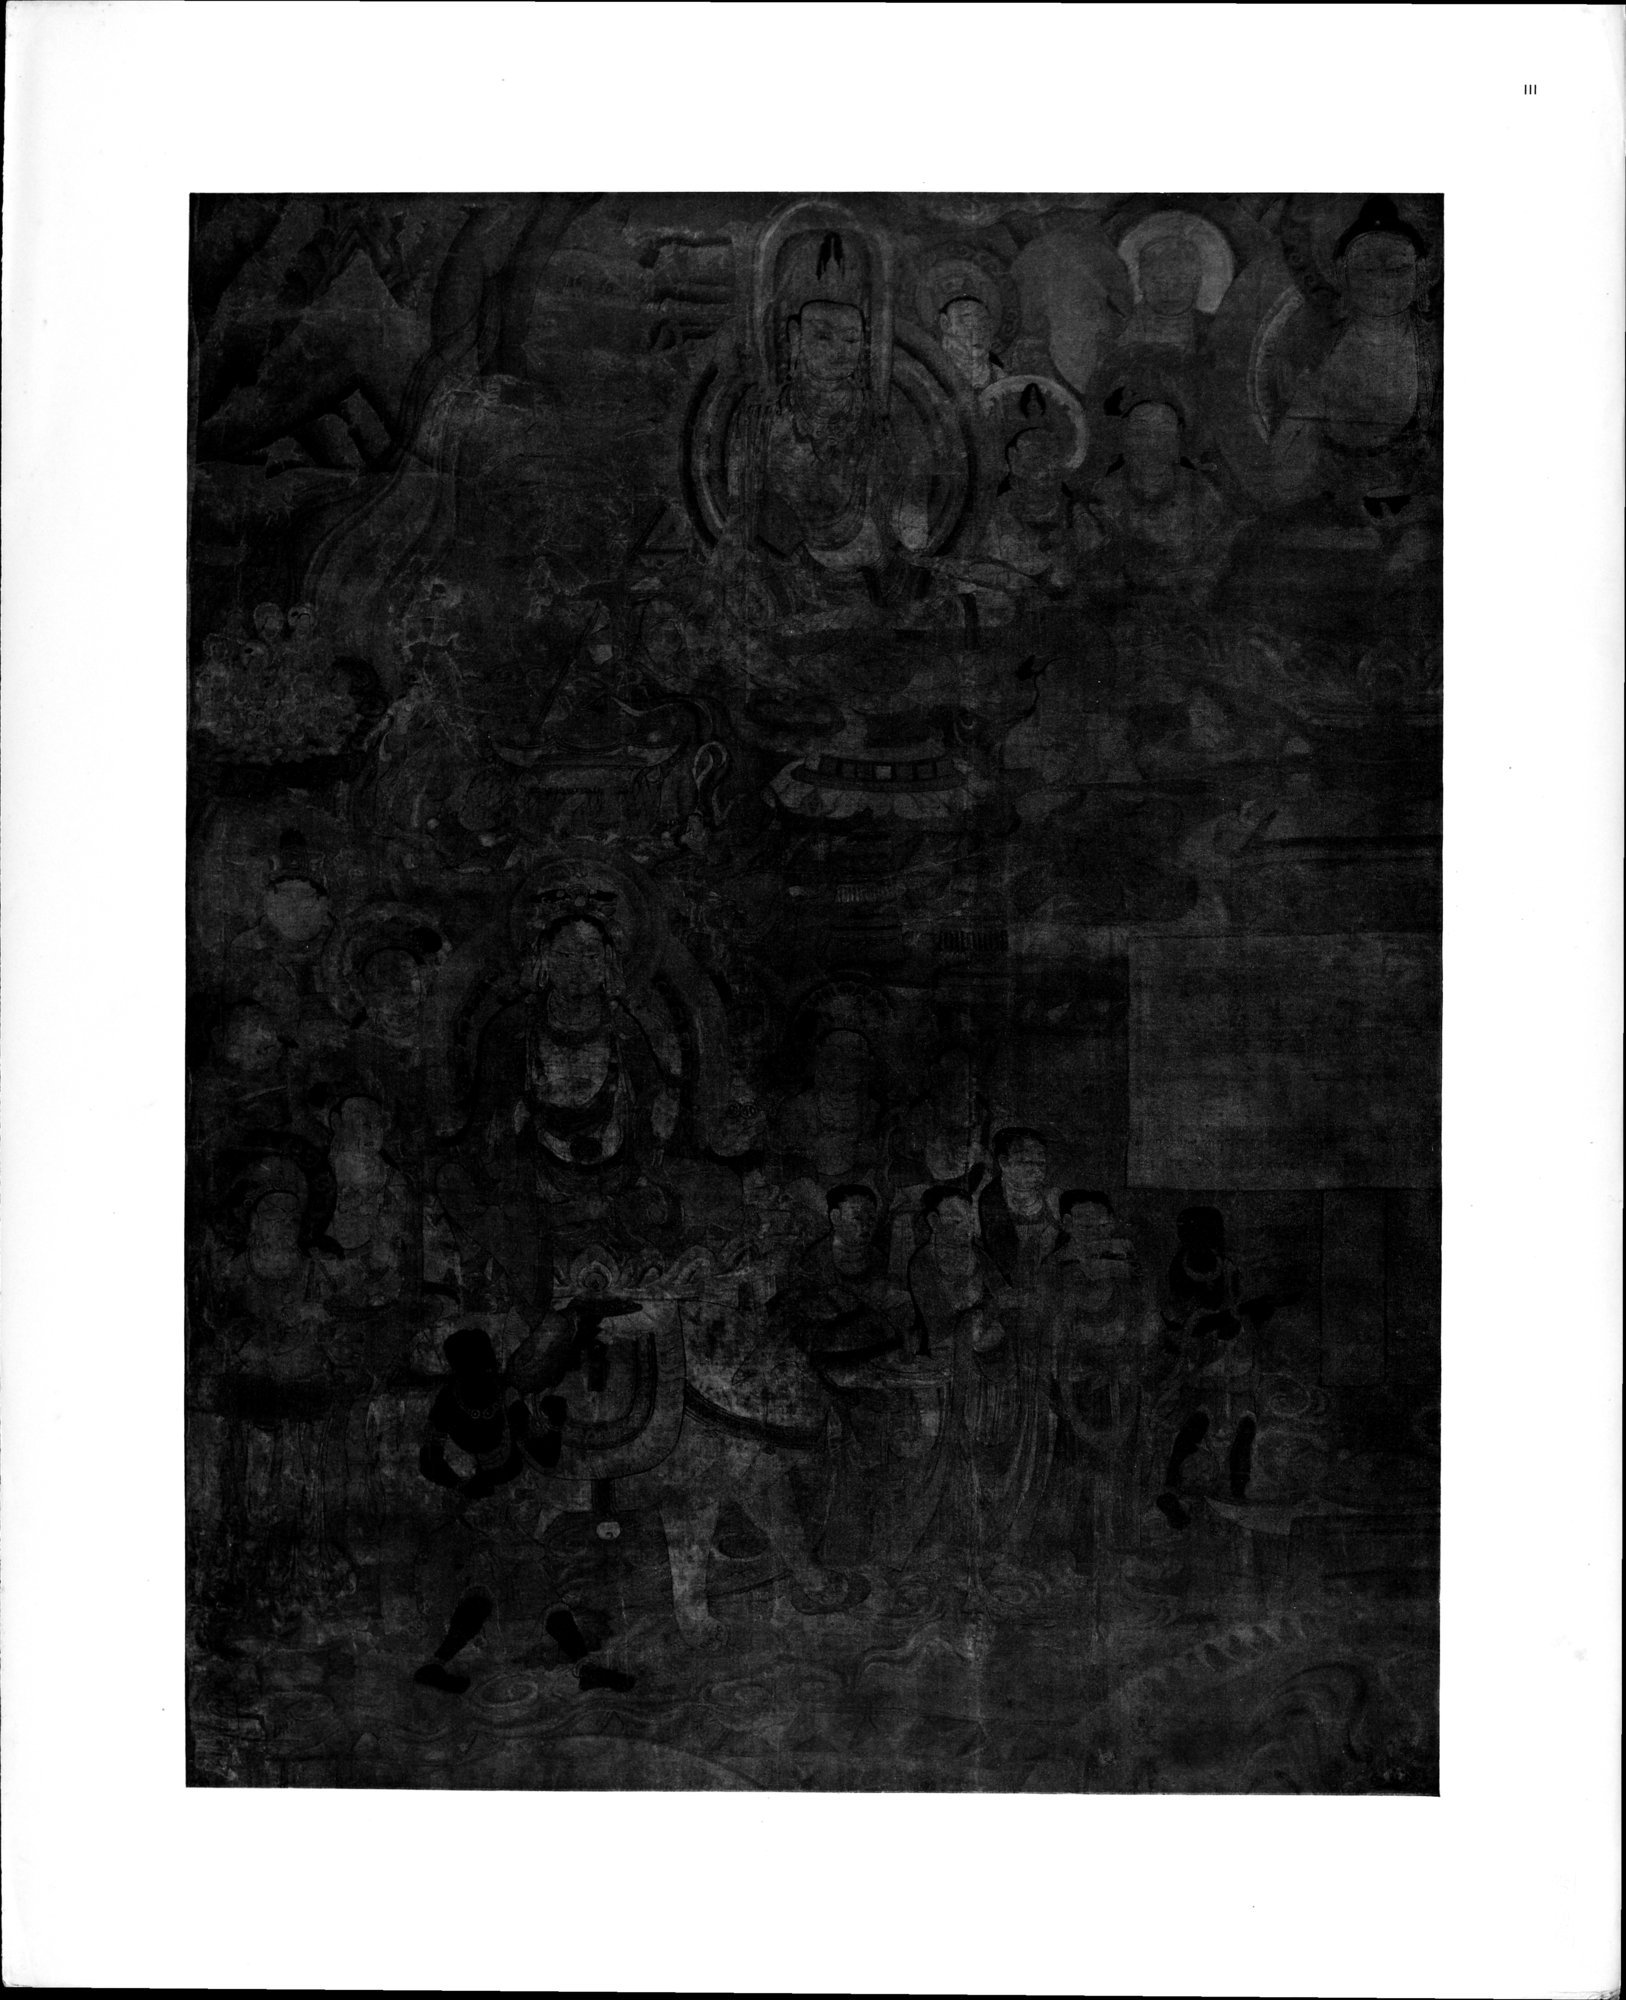 The Thousand Buddhas : vol.1 / Page 88 (Grayscale High Resolution Image)